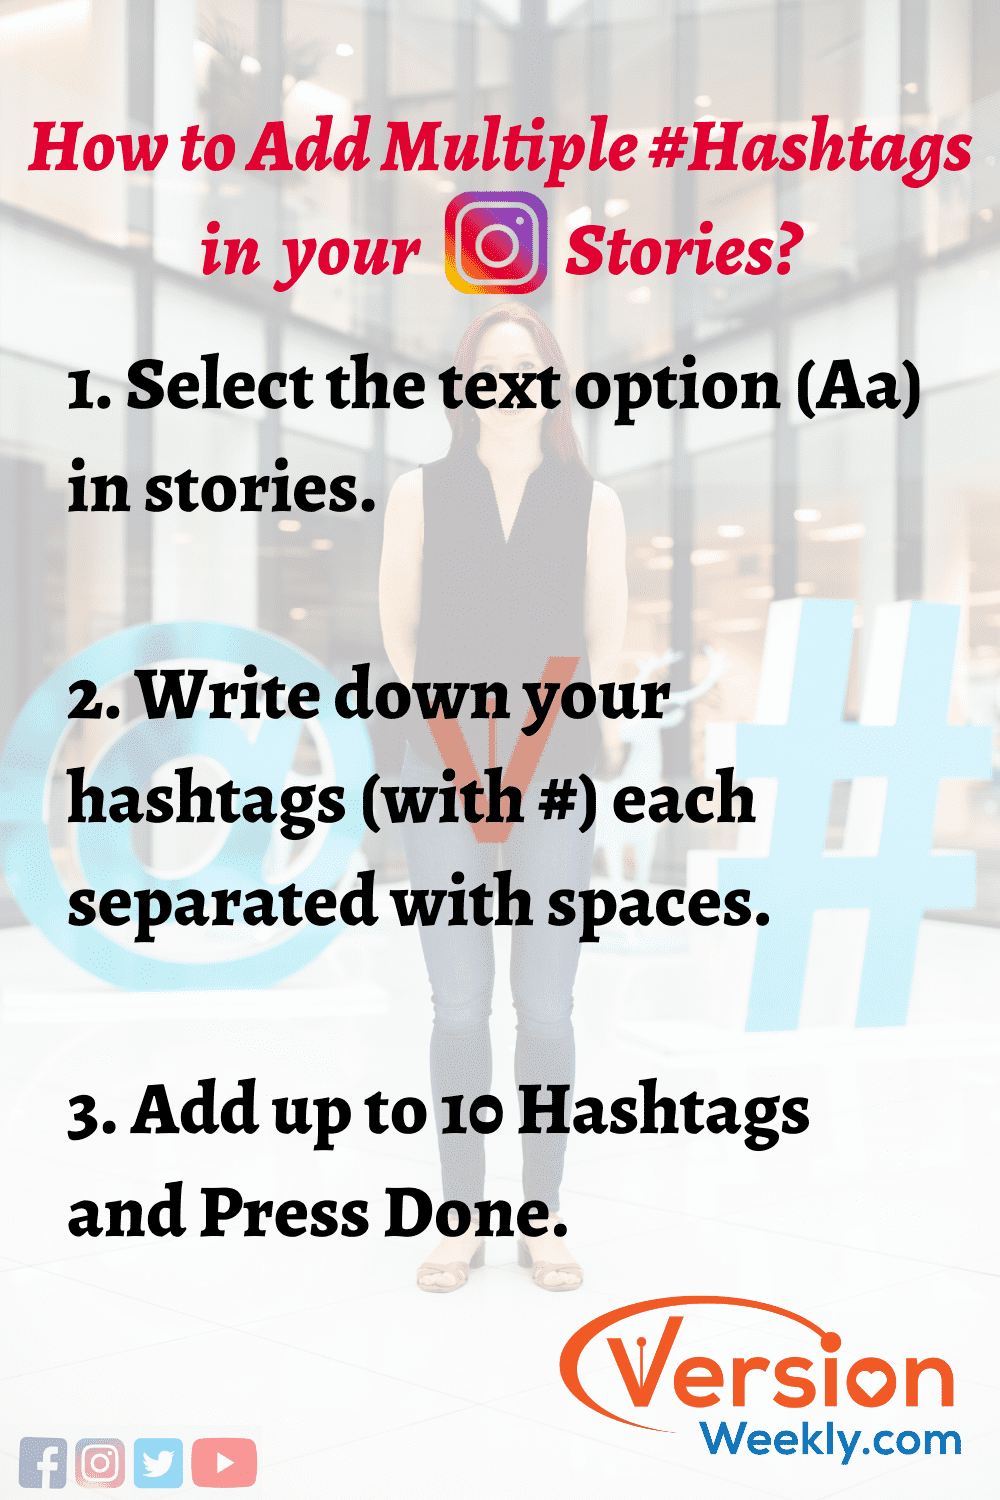 How to add multiple hashtags in Instagram stories